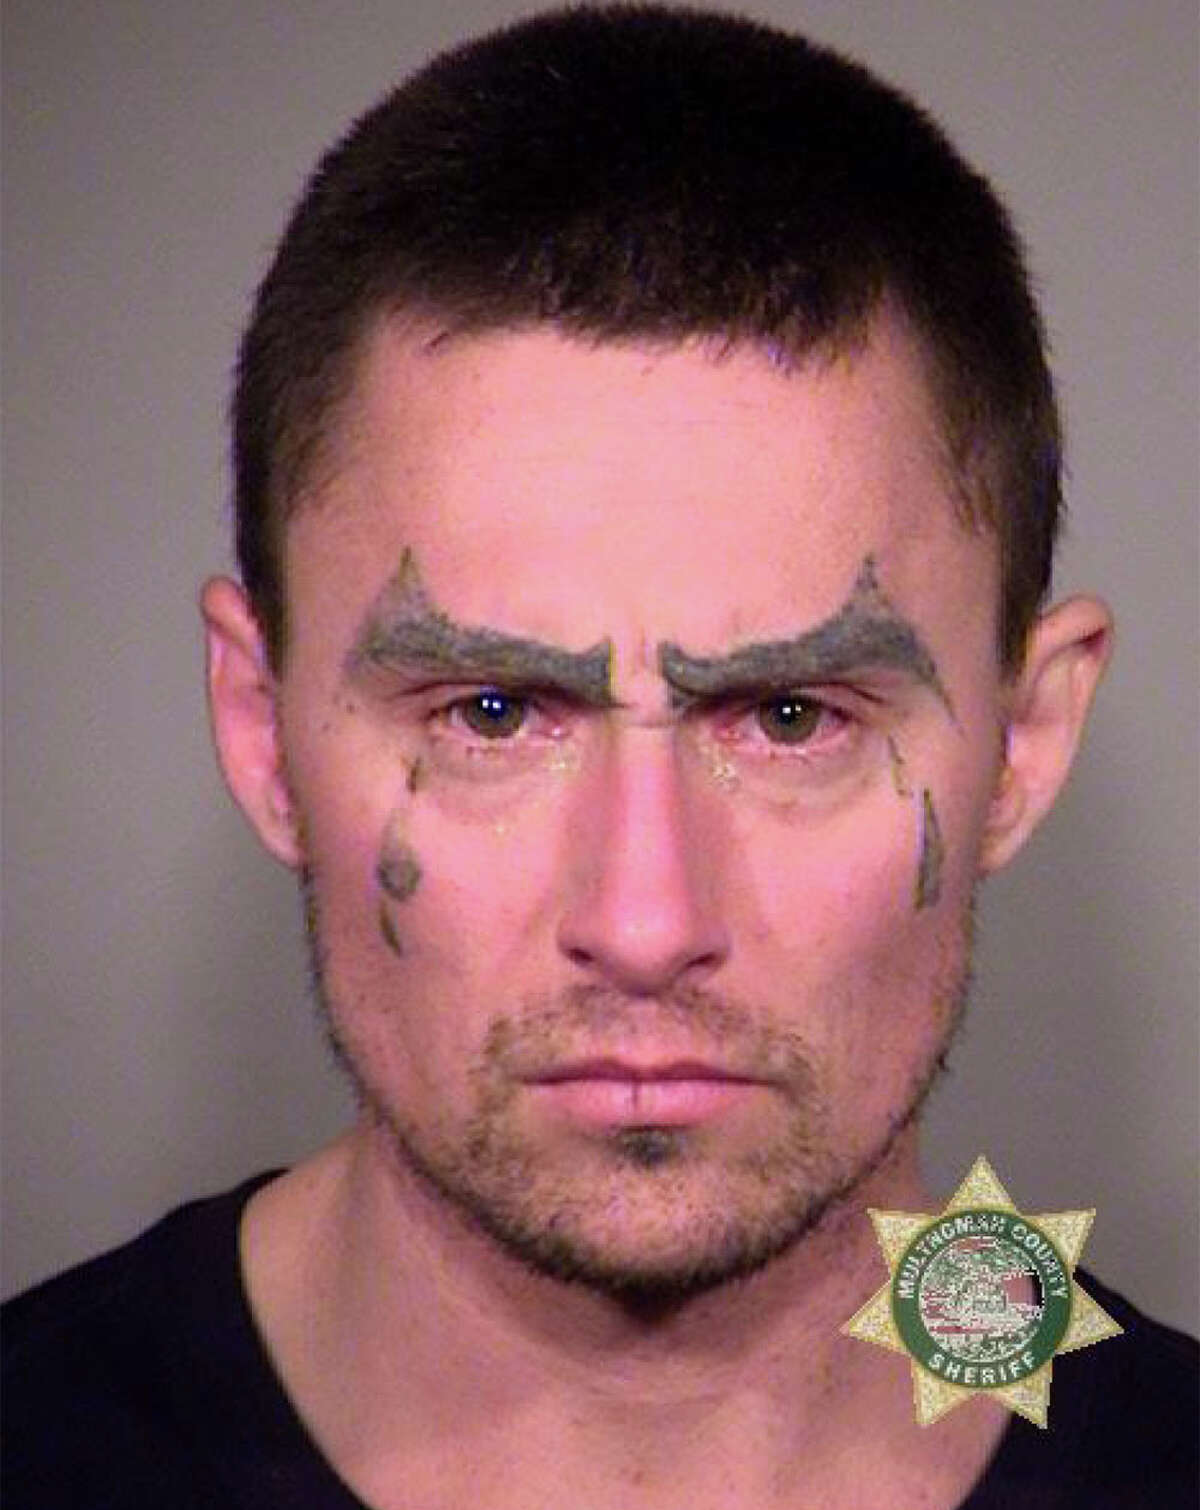 An Oregon man with more than a dozen mugshots to his name shows the detrimental effects of meth use spanning his 14 years of crime. The mugshot series was released in the beginning of February. Read more.